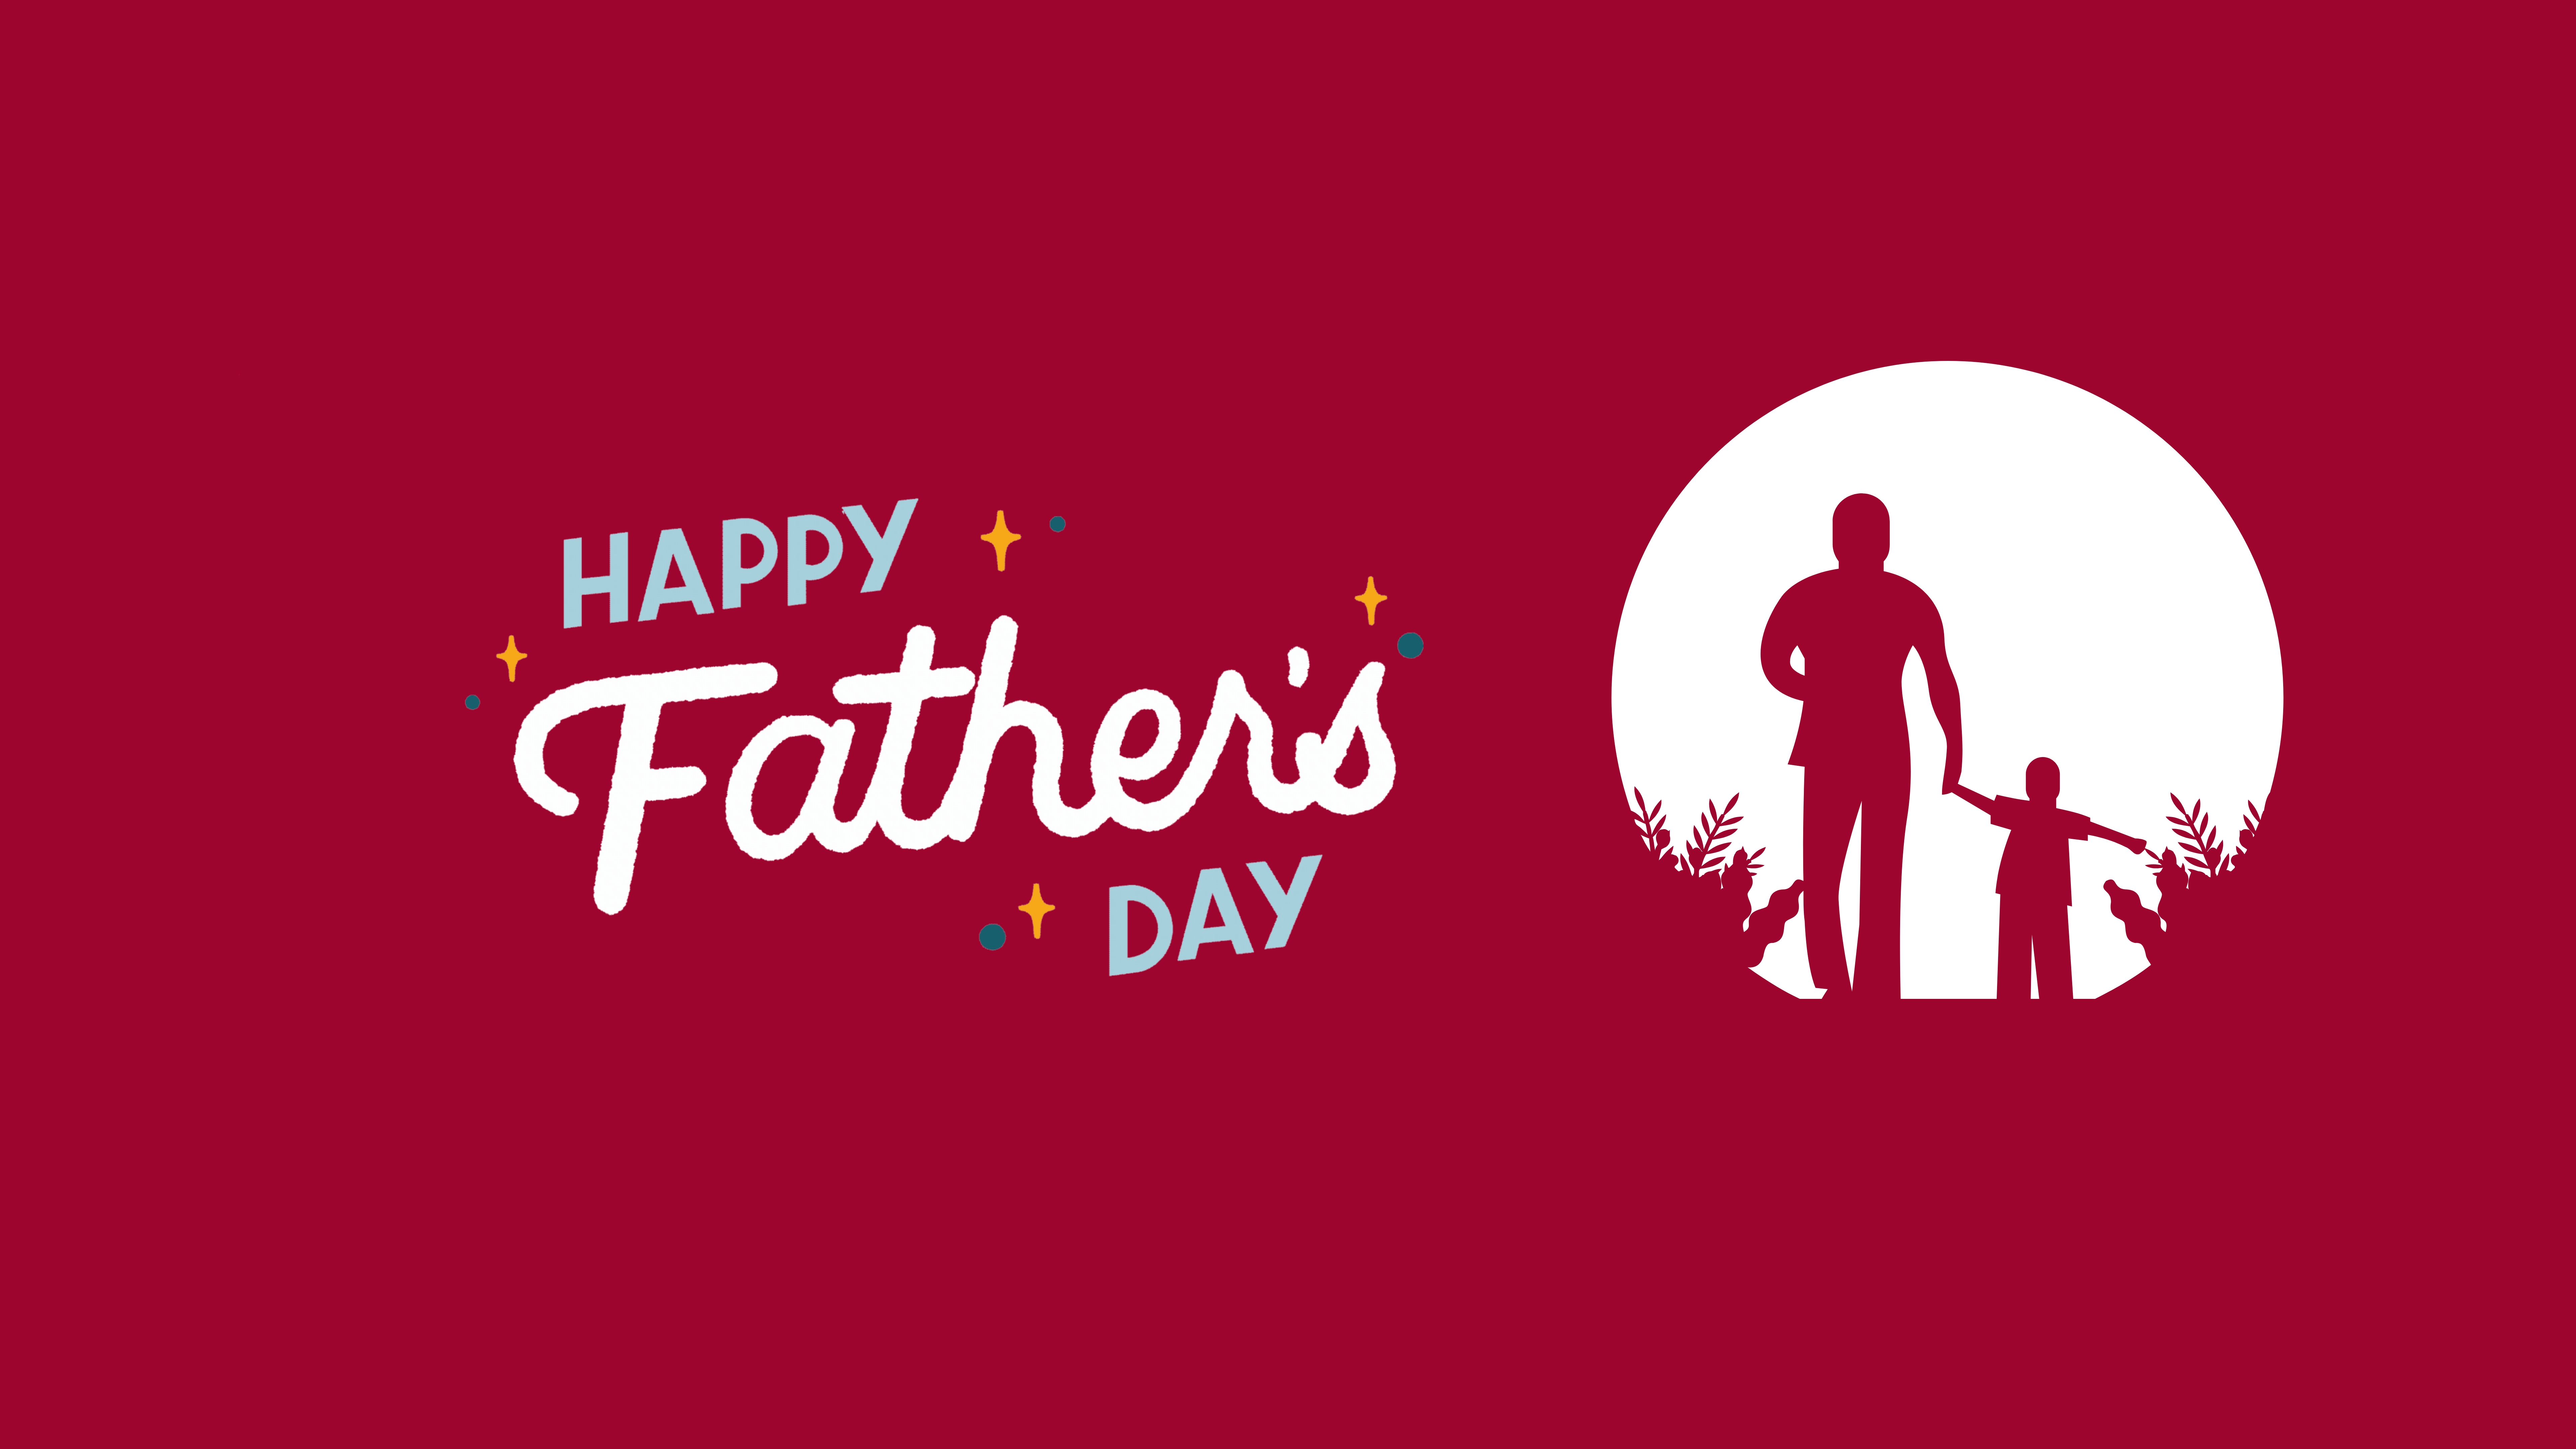 HD wallpaper, 5K, 8K, Red Background, Happy Fathers Day